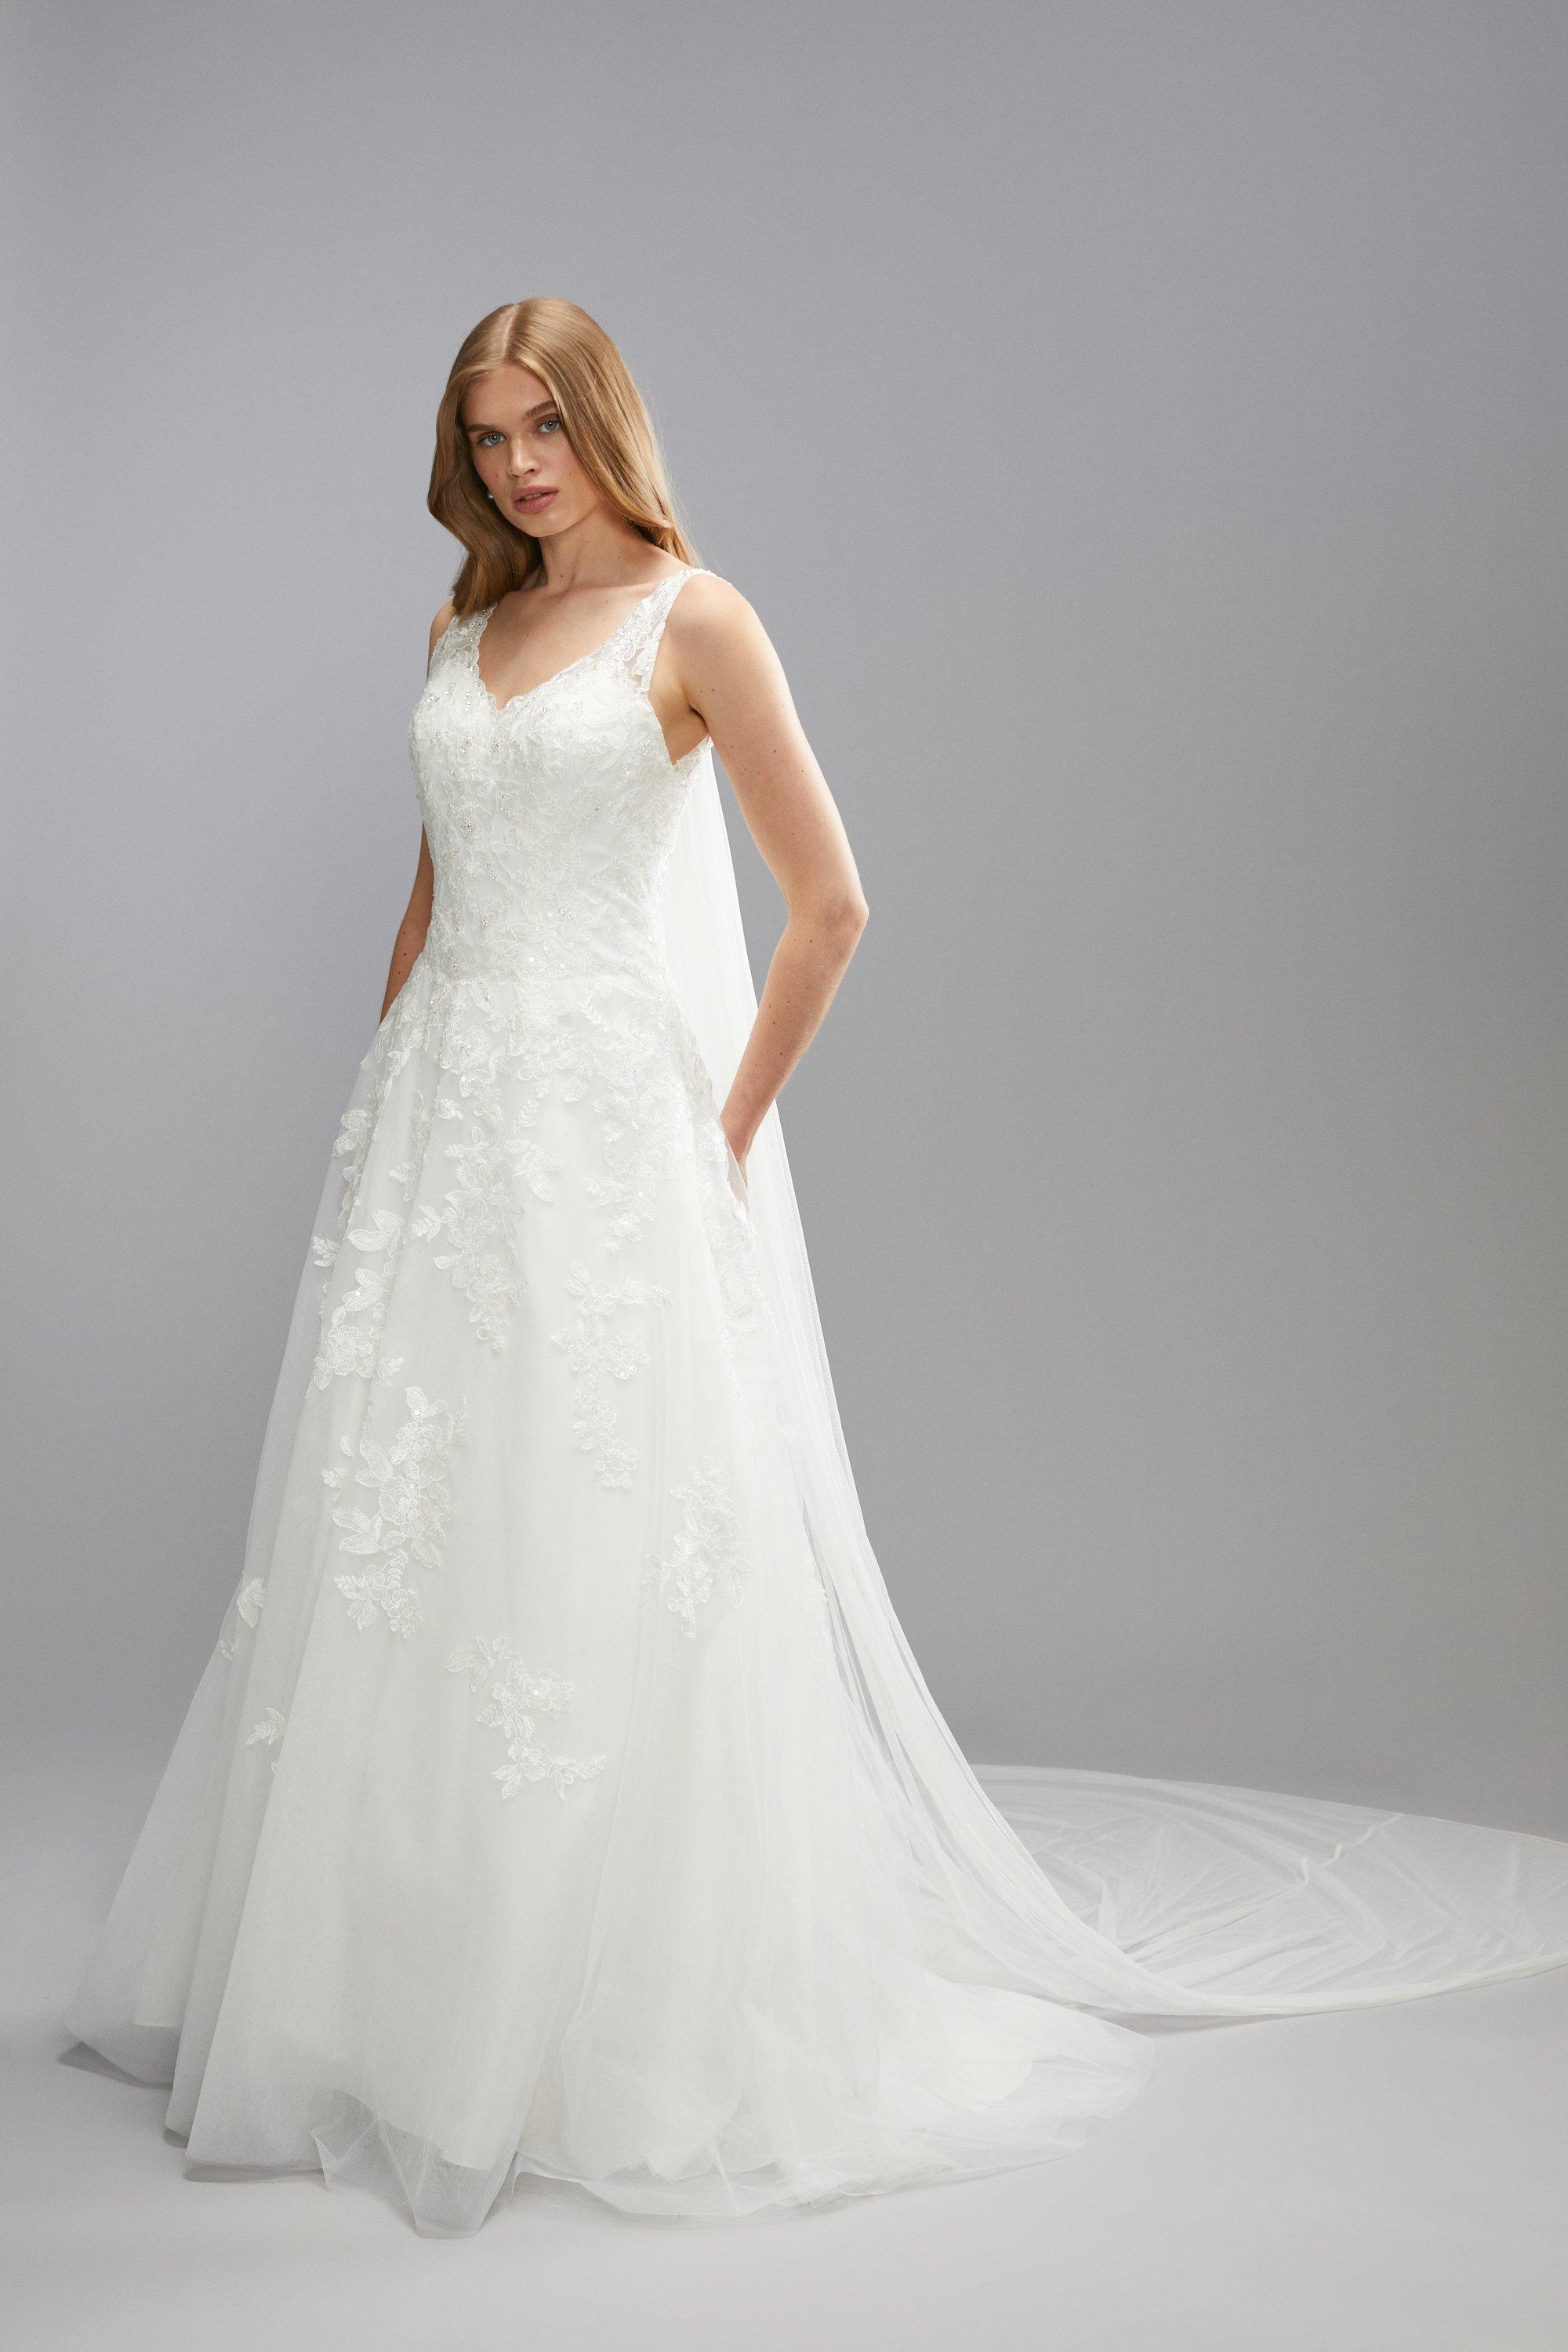 Lace Applique Full Skirted Wedding Dress